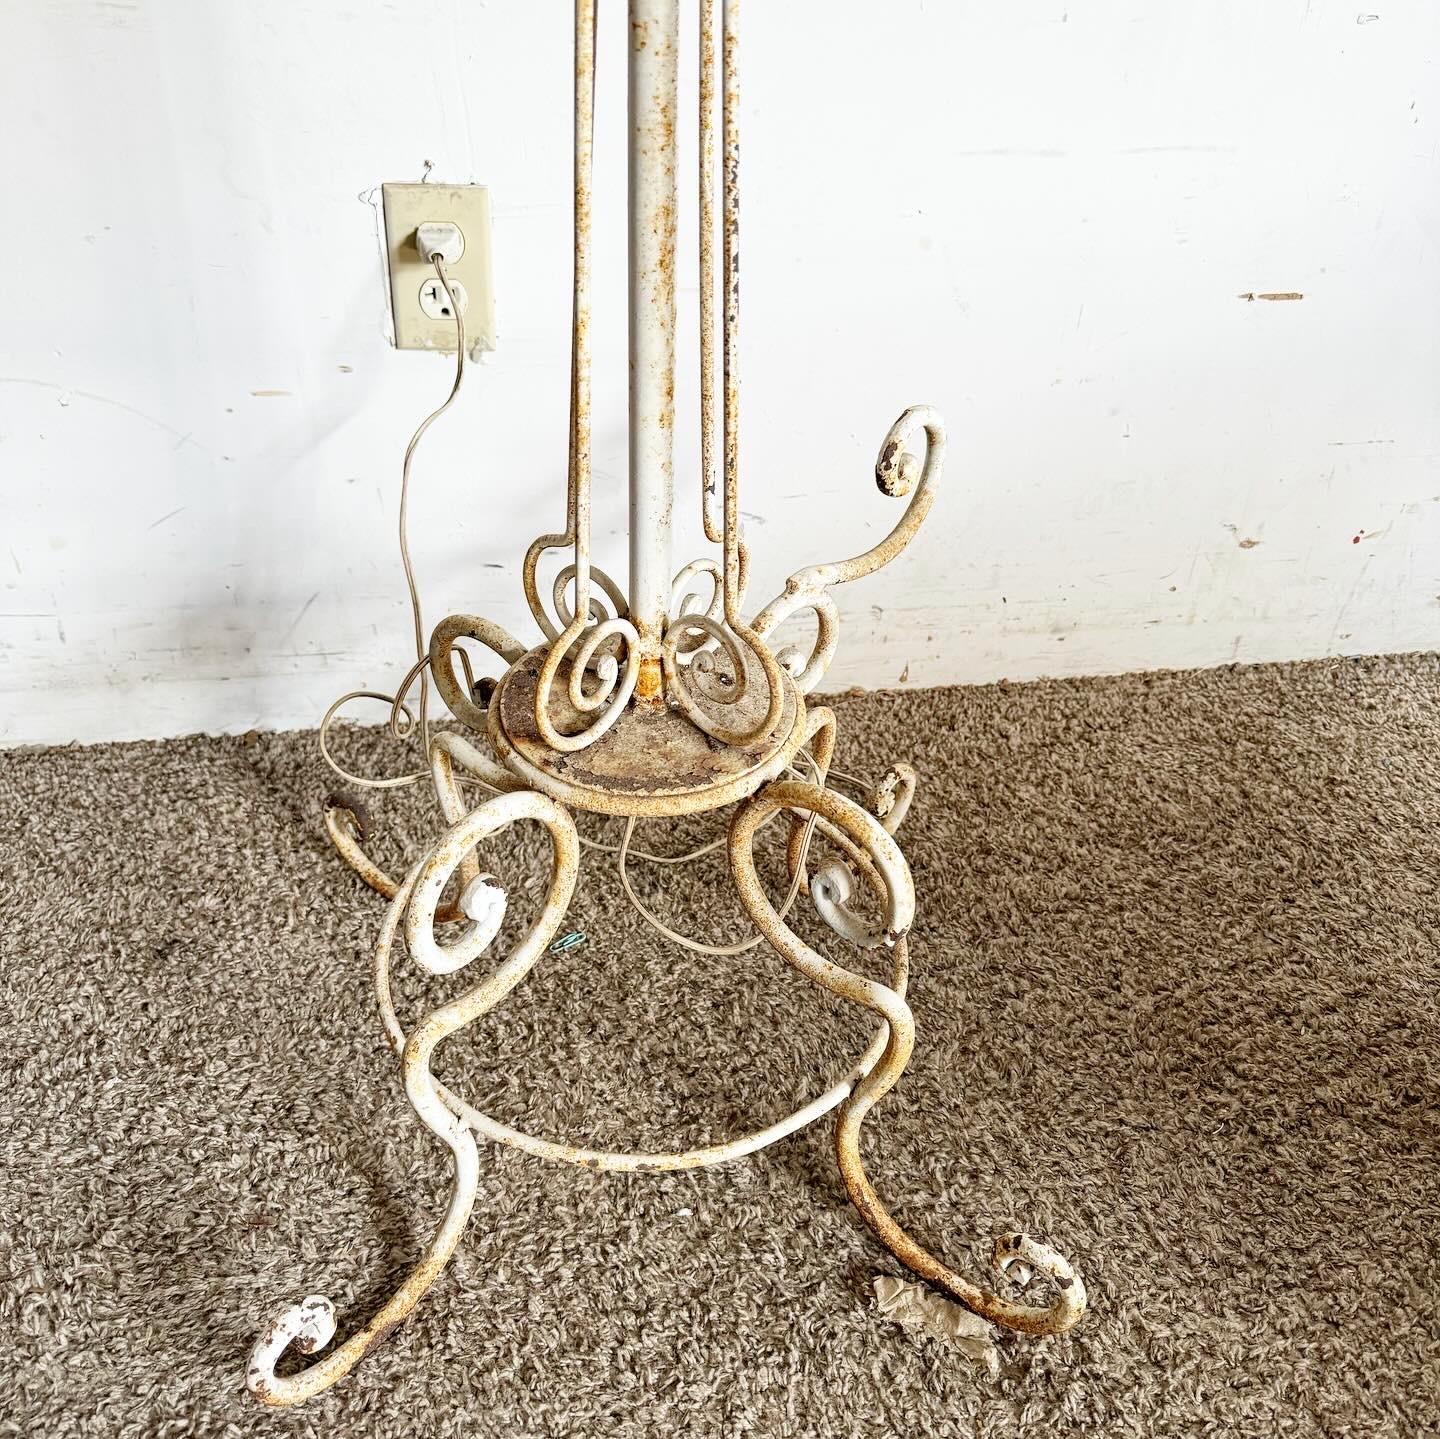 Vintage Wrought Iron Painted White Floor Lamp In Good Condition For Sale In Delray Beach, FL